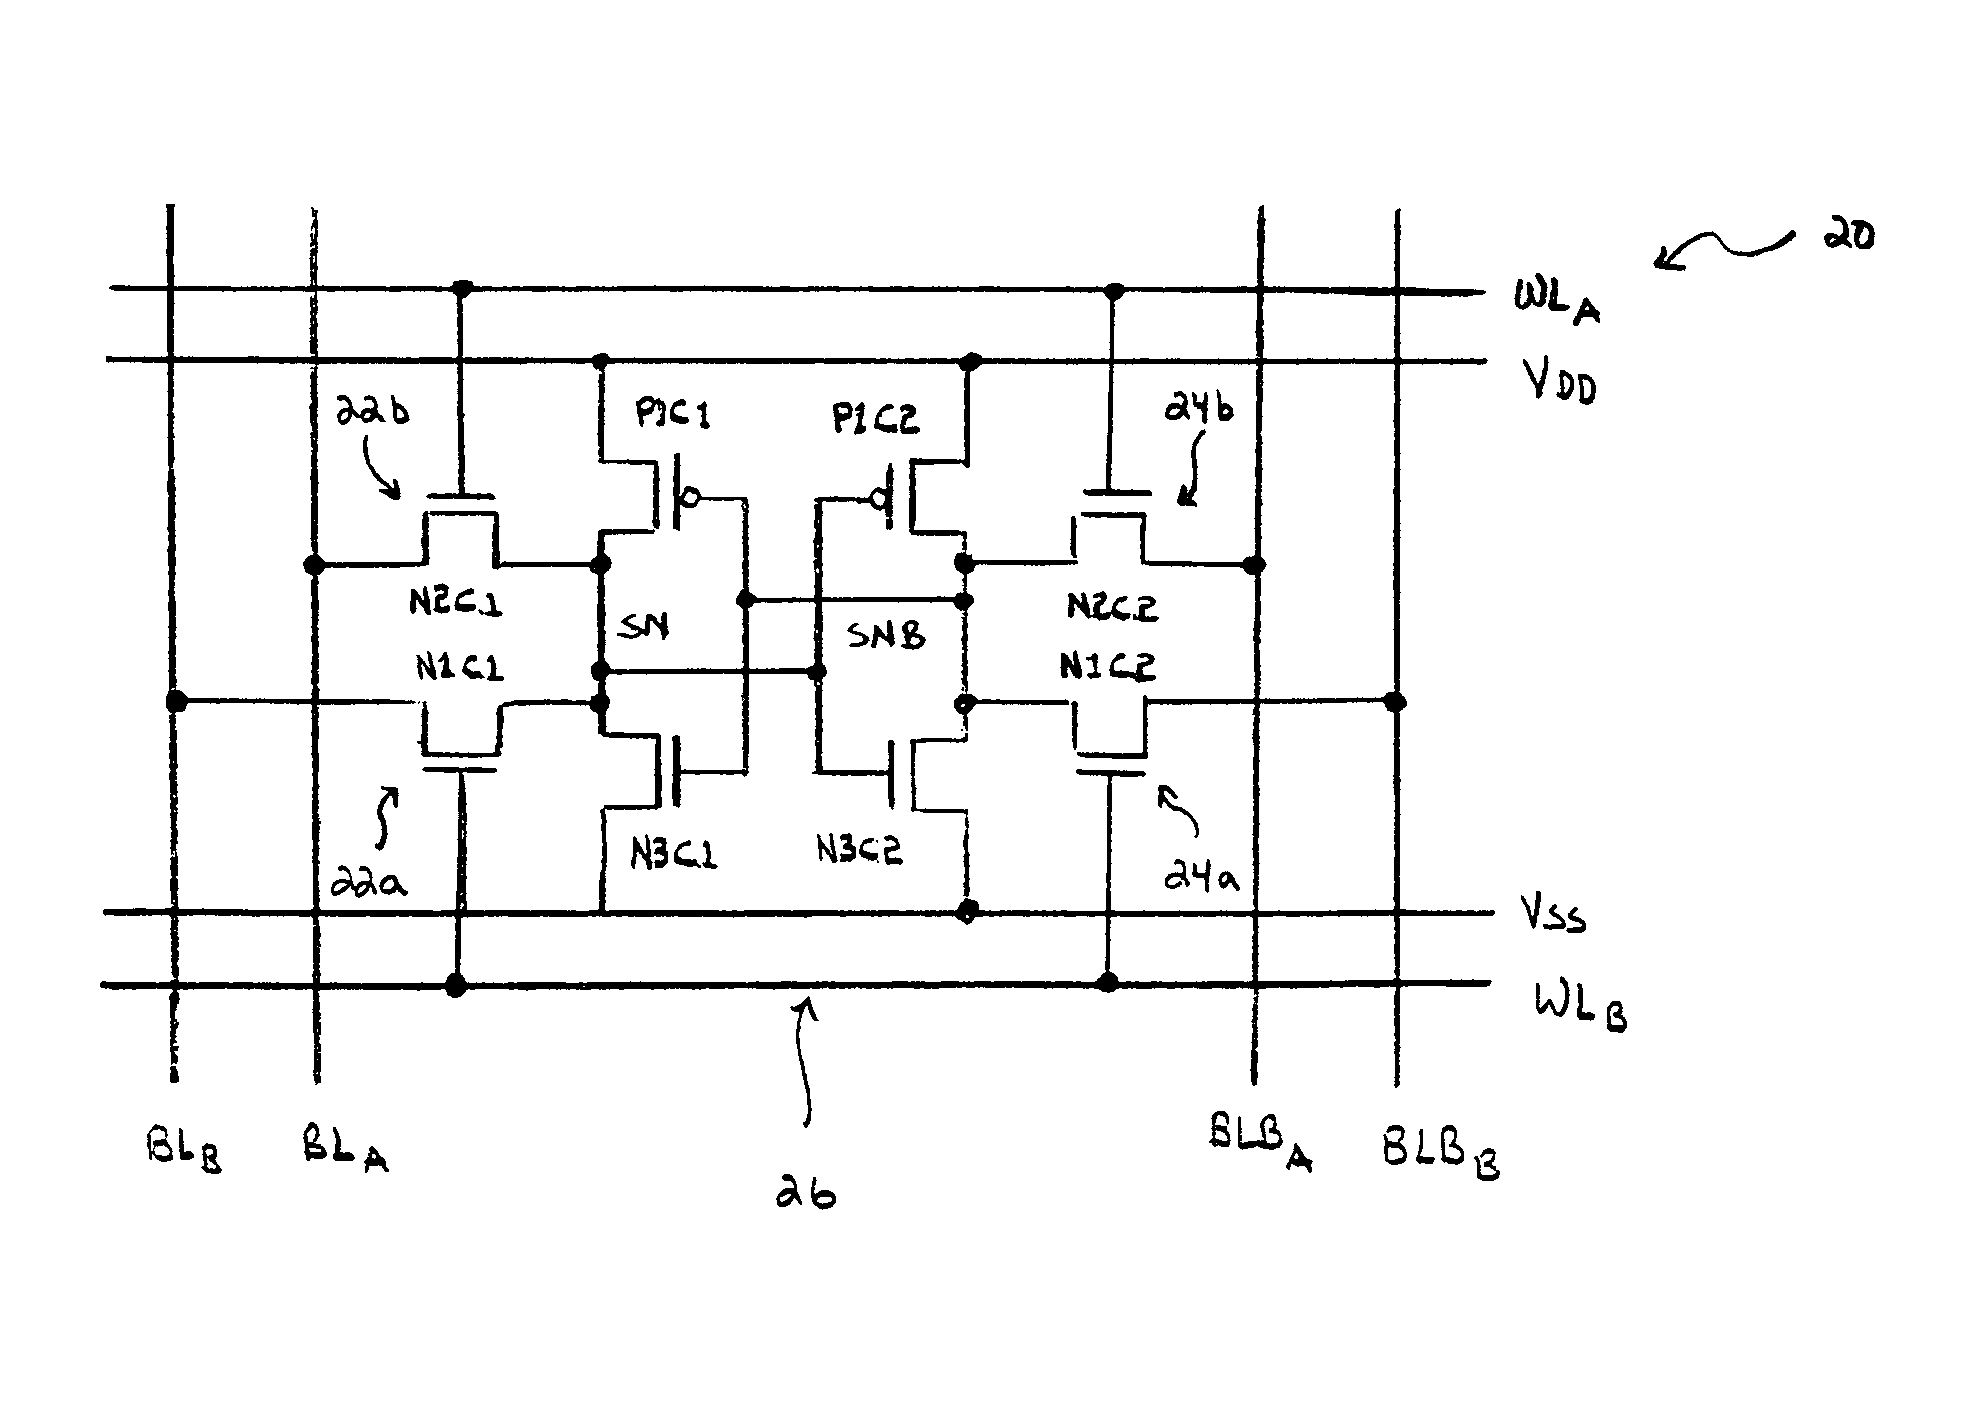 Integrated circuit cell architecture configurable for memory or logic elements